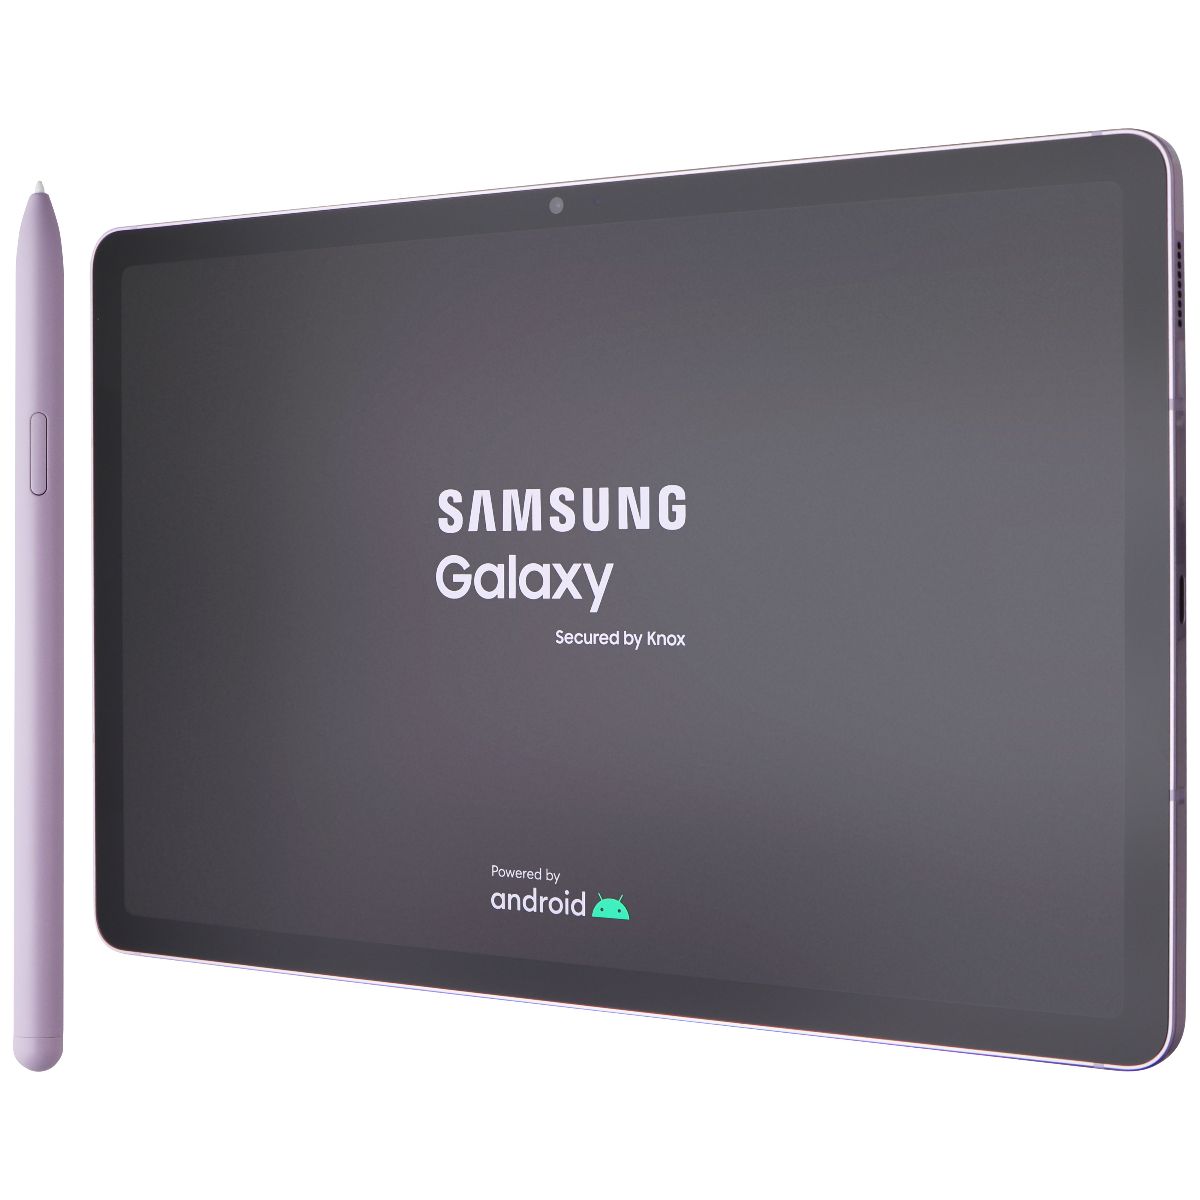 Samsung Galaxy Tab S9 FE (10.9-in) (SM-X510) Wi-Fi with S-Pen 128GB - Lavender iPads, Tablets & eBook Readers Samsung    - Simple Cell Bulk Wholesale Pricing - USA Seller